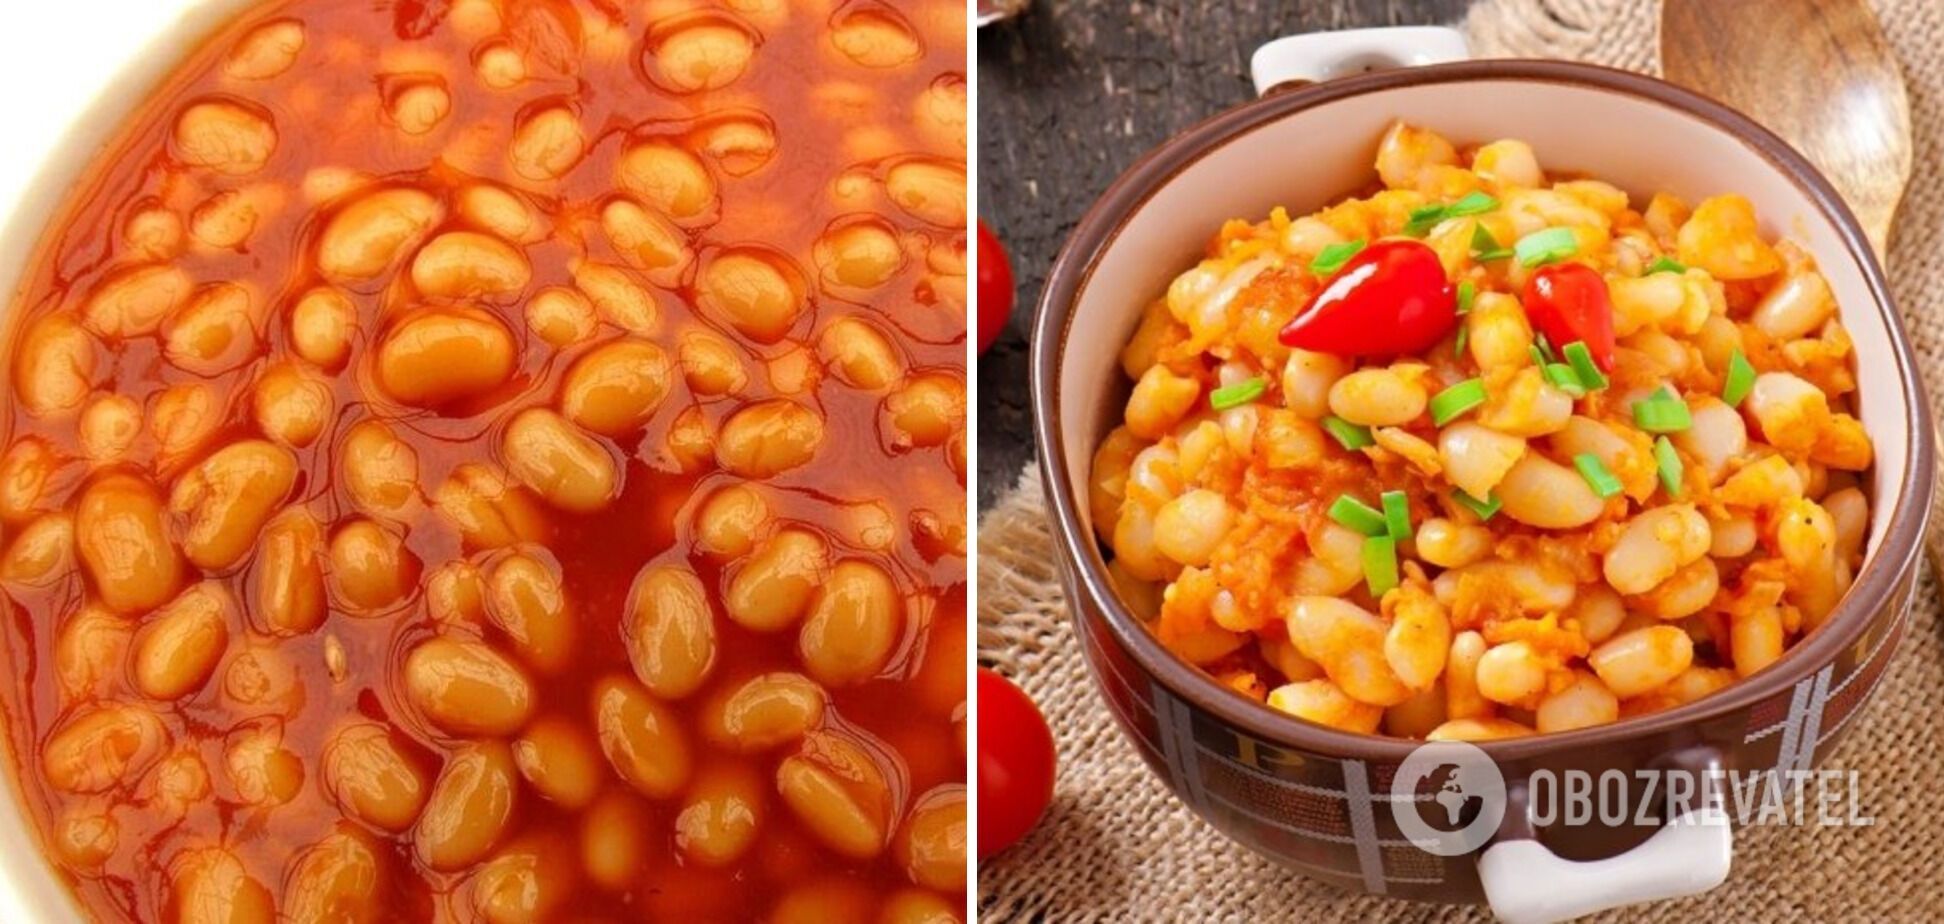 Beans in tomato juice like store-bought